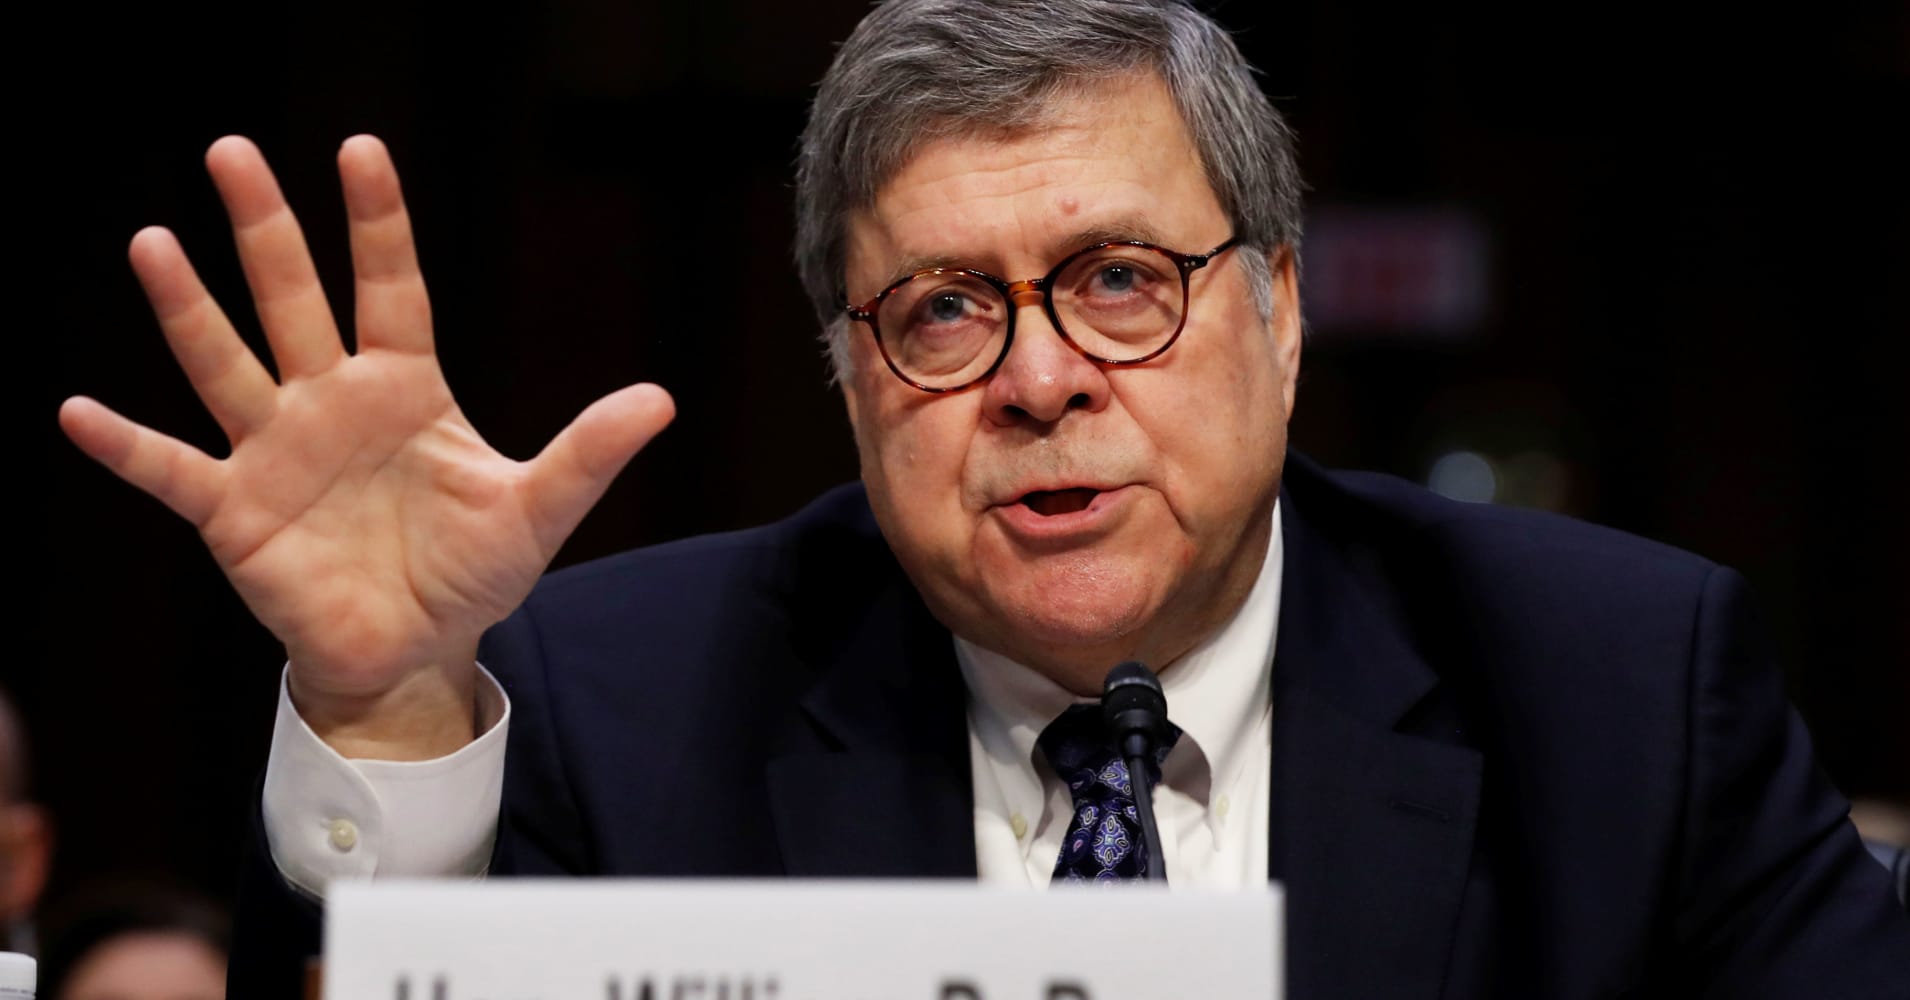 These are the top takeaways from Trump attorney general nominee William Barr's confirmation hearing